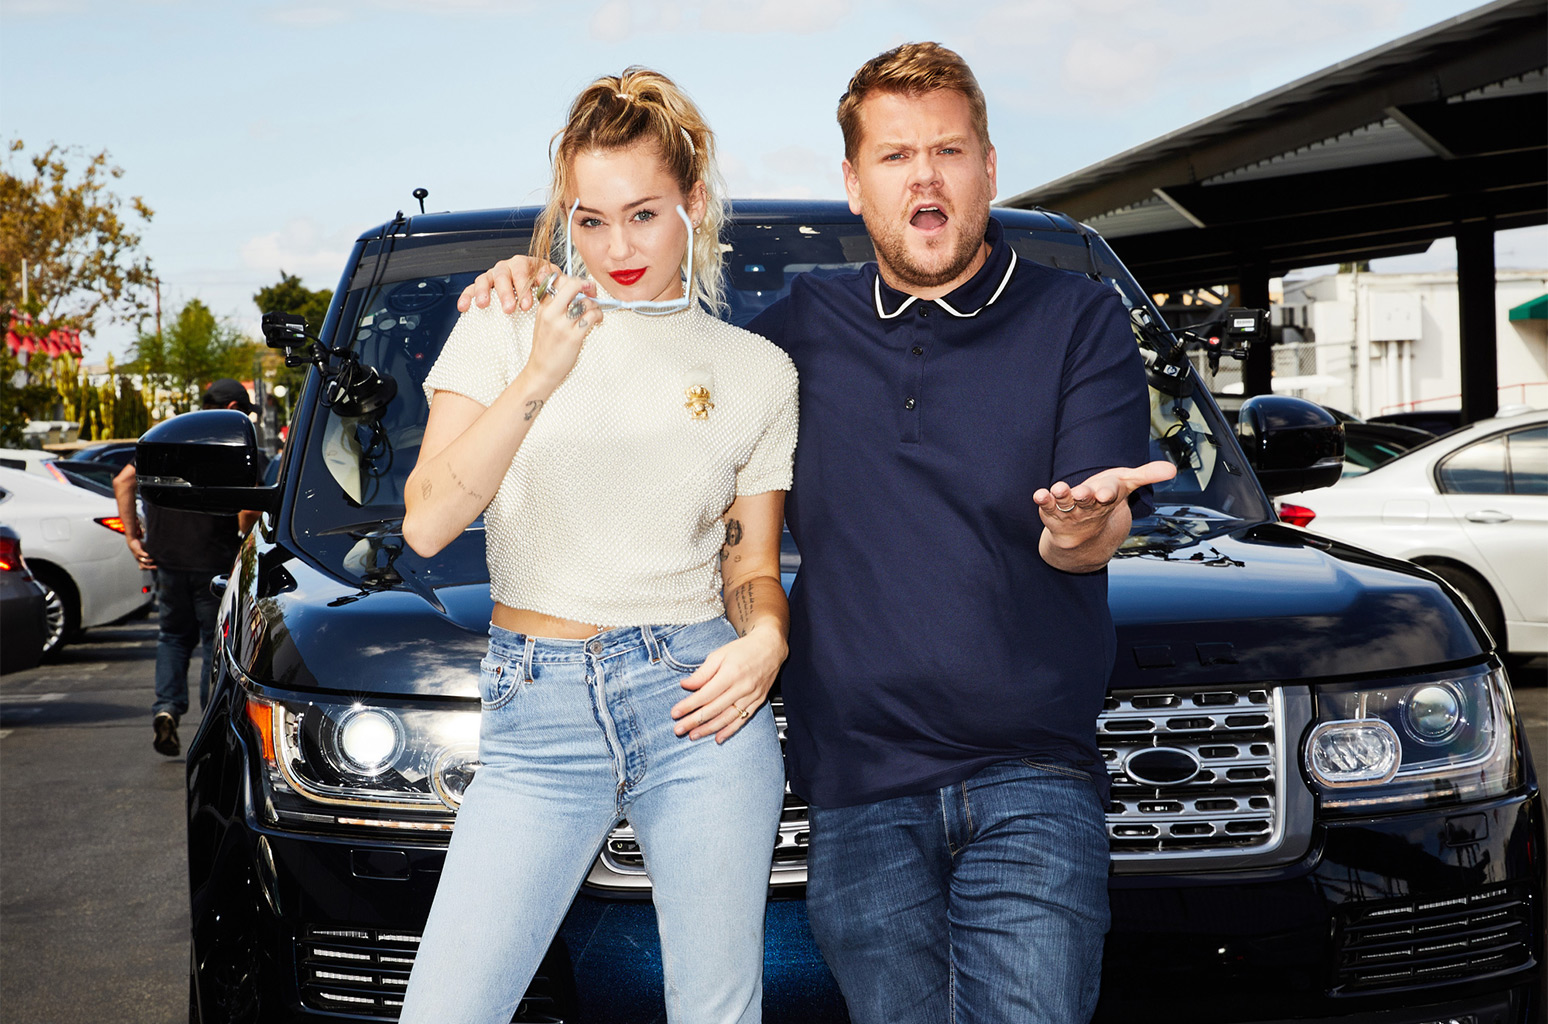 THE SOCIAL MEDIA SURPRISED BECAUSE JAMES CORDEN DOES NOT DRIVE IN THE CARPOOL KAROAKE